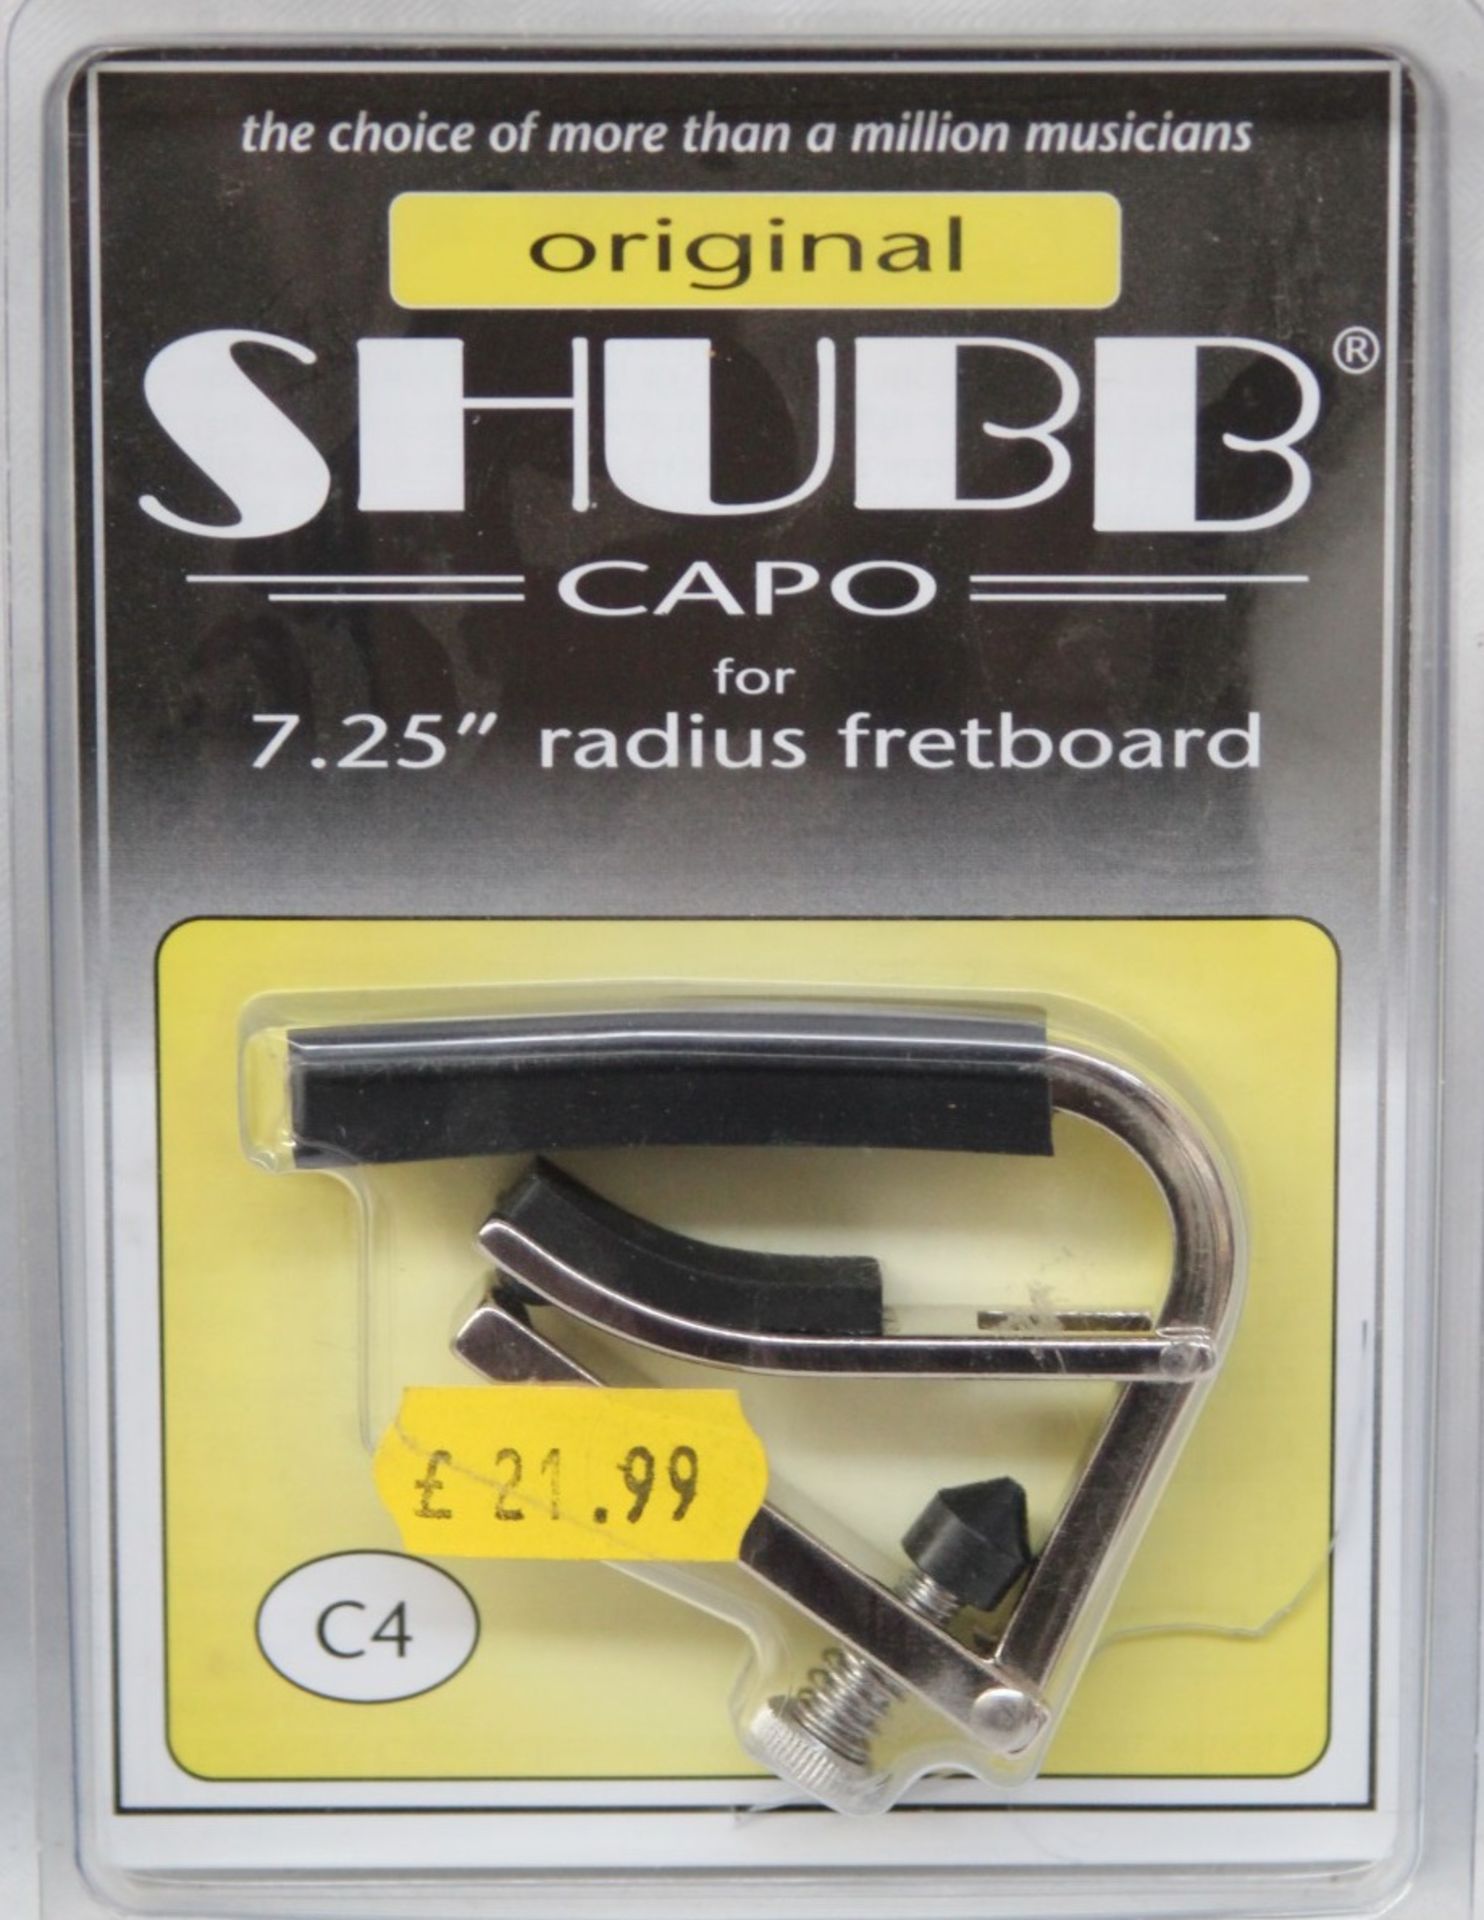 2 x Original Shubb Guitar Capos - For 7.25" Fretboards - Type C4 - Brand New Stock - CL020 - Ref - Image 2 of 2